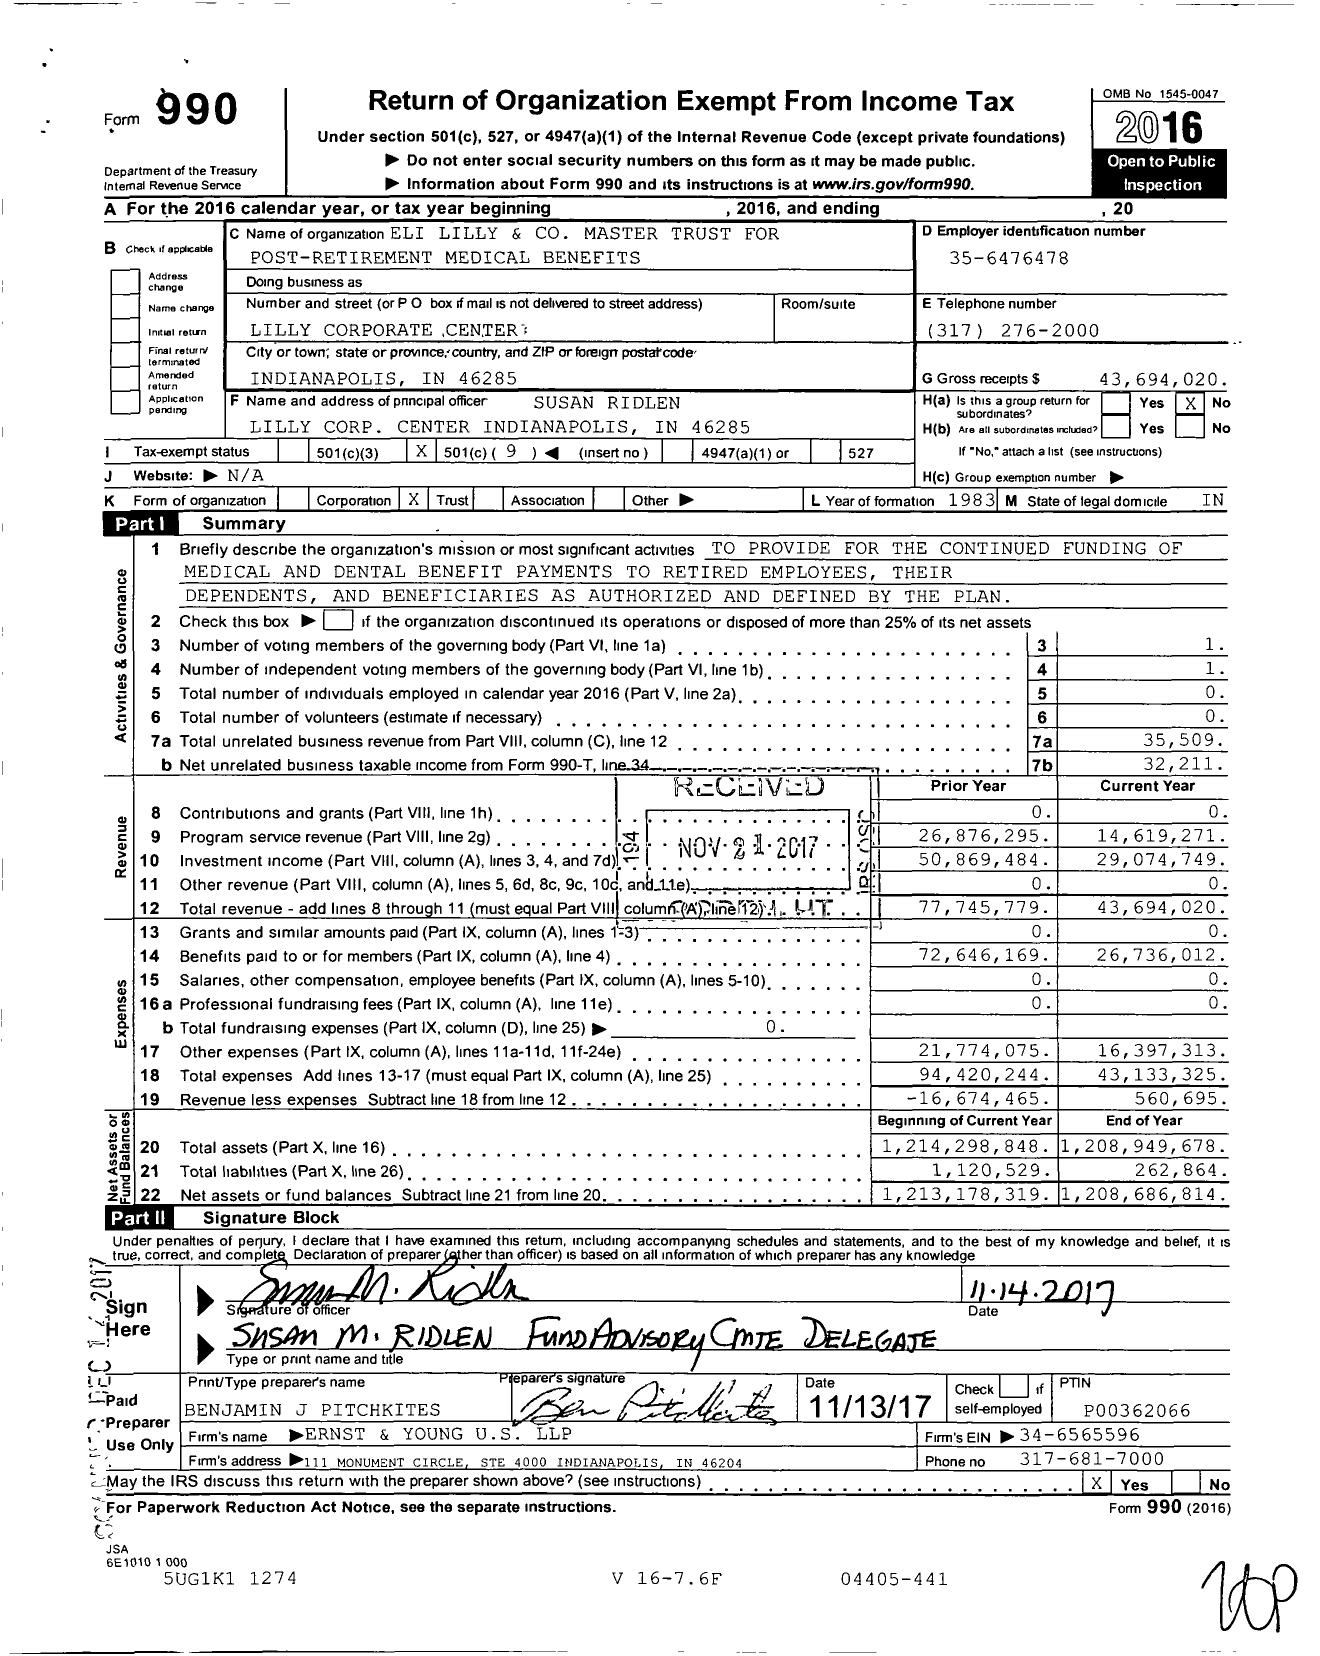 Image of first page of 2016 Form 990O for Eli Lilly and Master Trust for Post-Retirement Medical Benefits